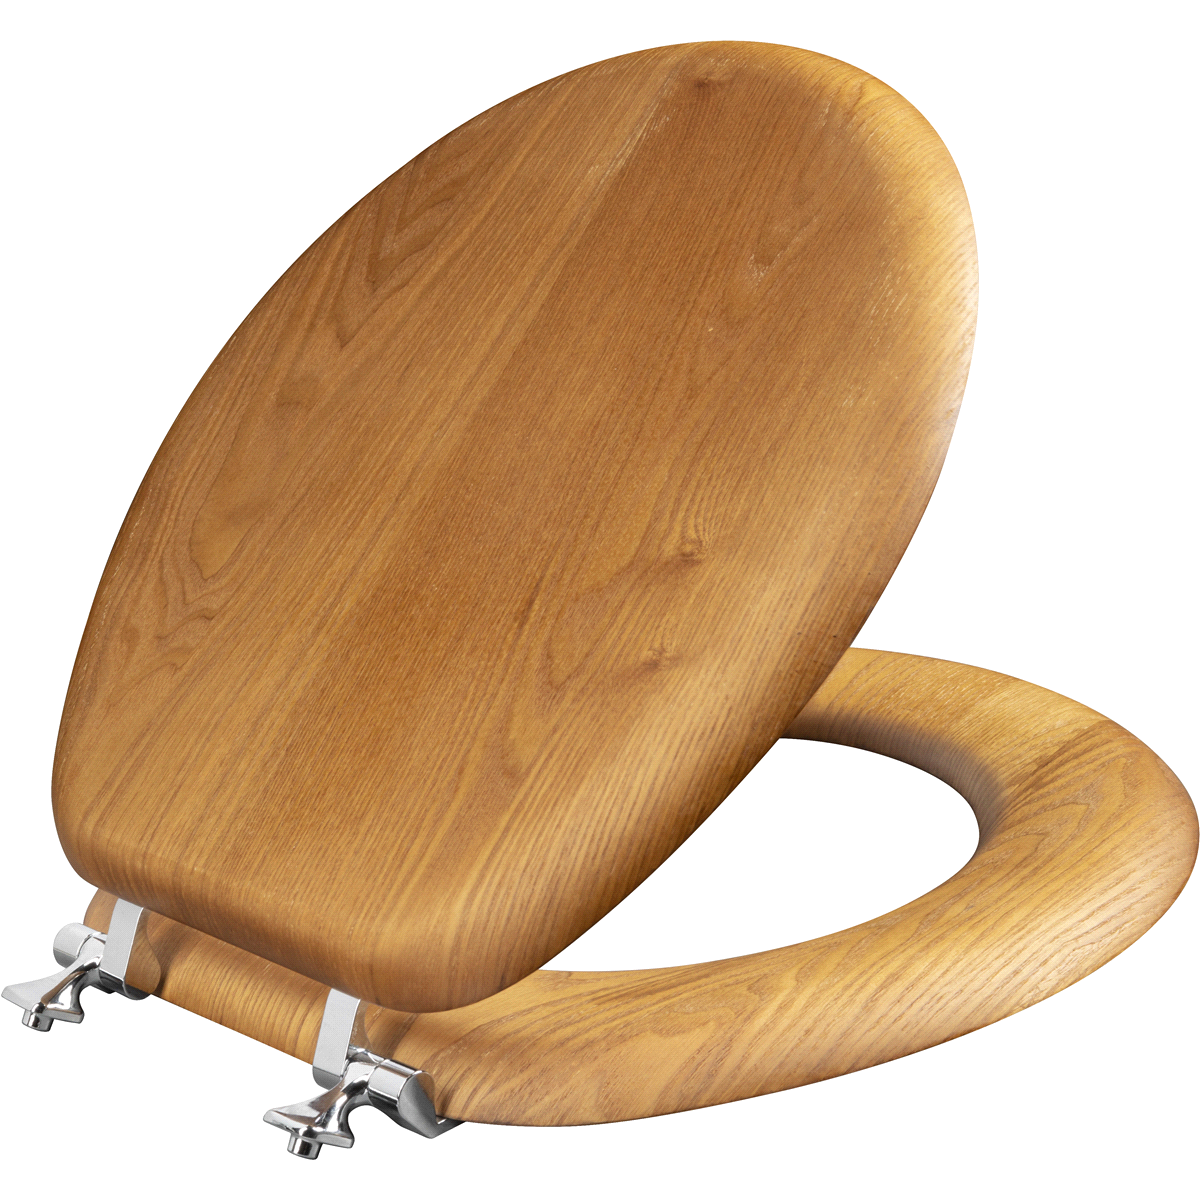 slide 1 of 1, Round Natural Reflections Wood Veneer Toilet Seat with Chrome Hinge, Oak, 17 in